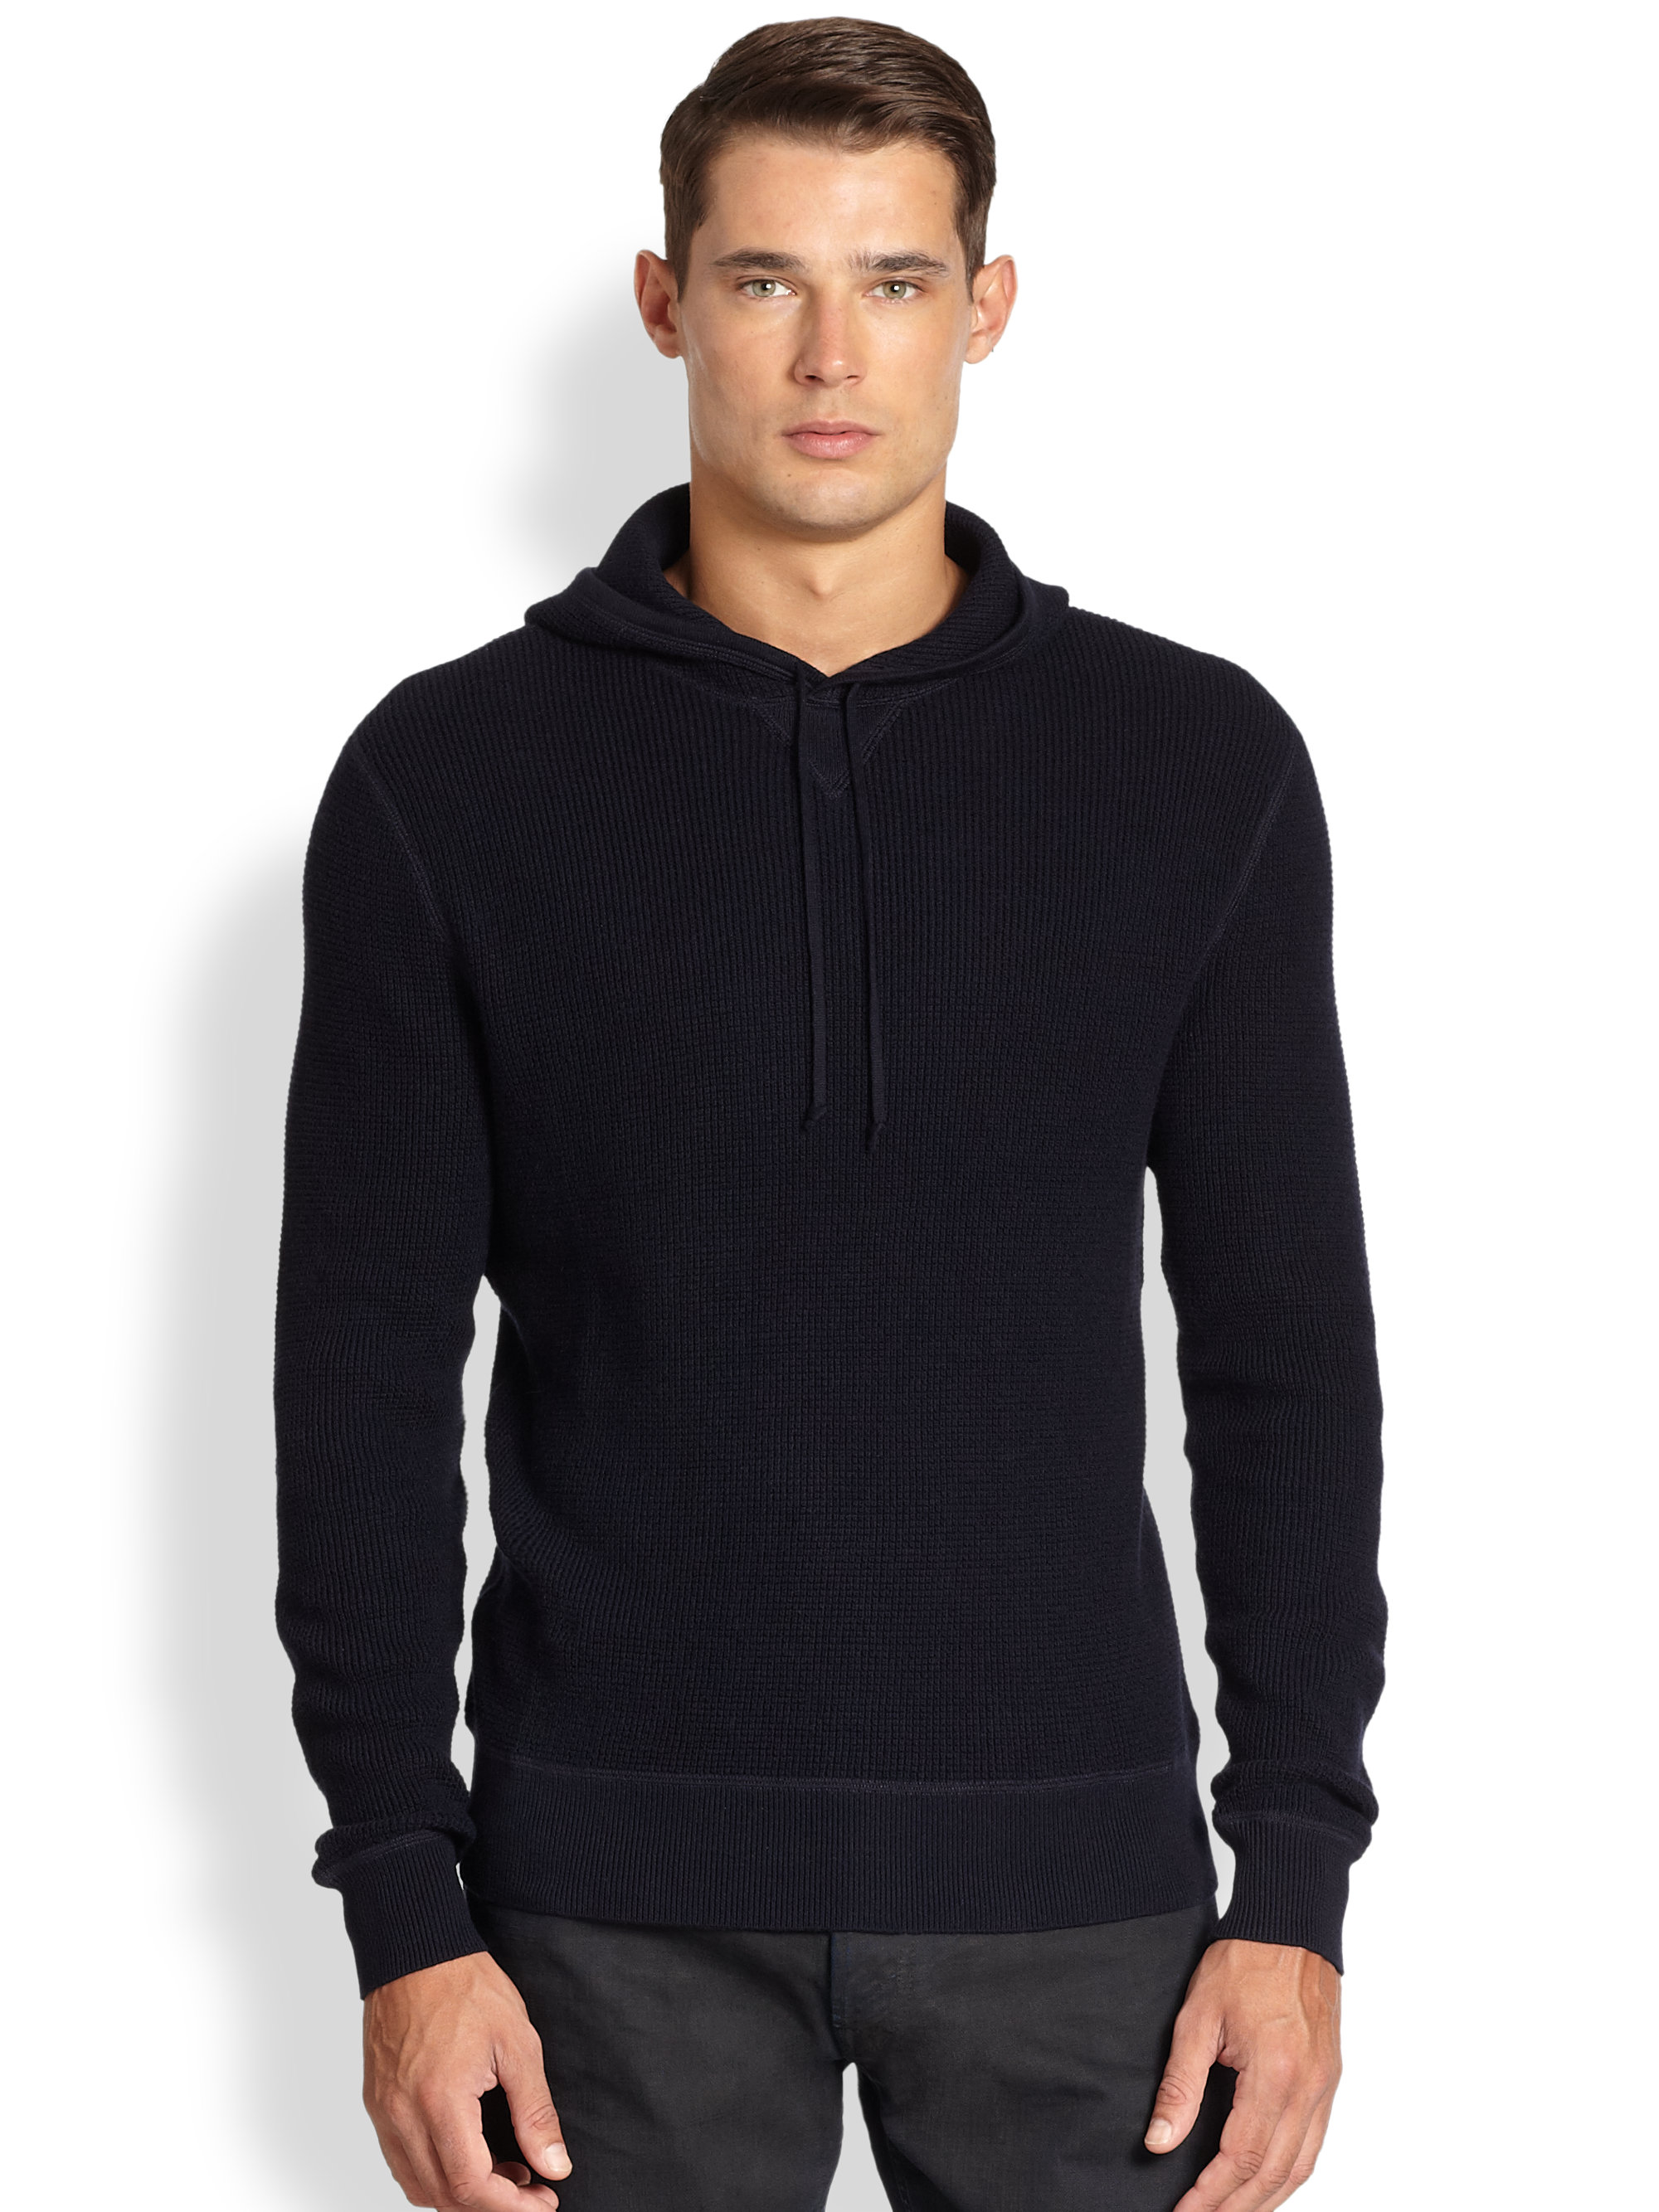 Lyst - Ralph Lauren Black Label Cotton and Cashmere Thermal Hoodie in ...